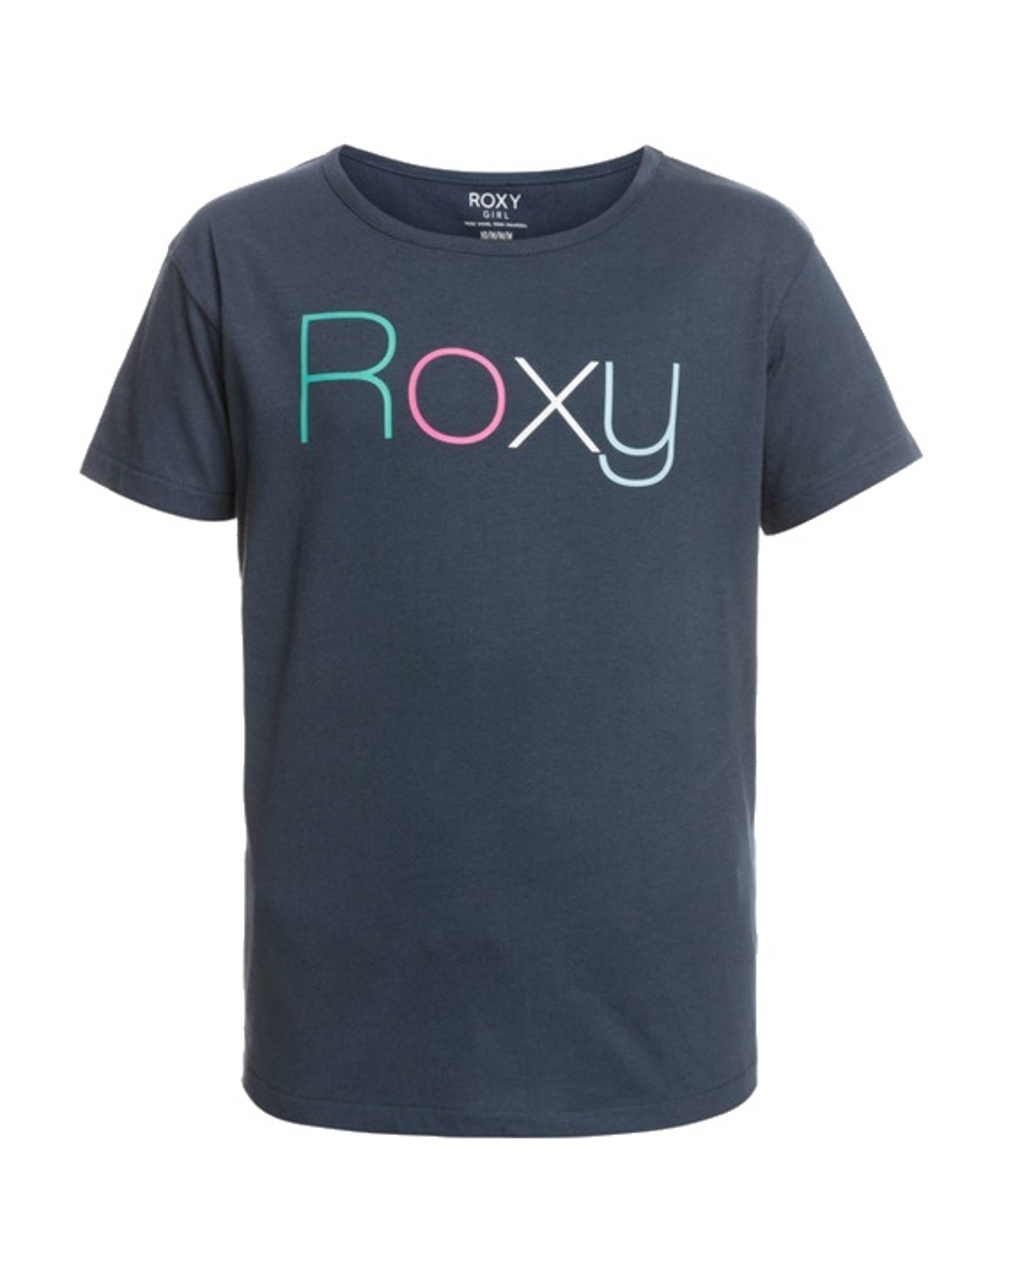 Roxy Kinder T-Shirt Day And Night navy